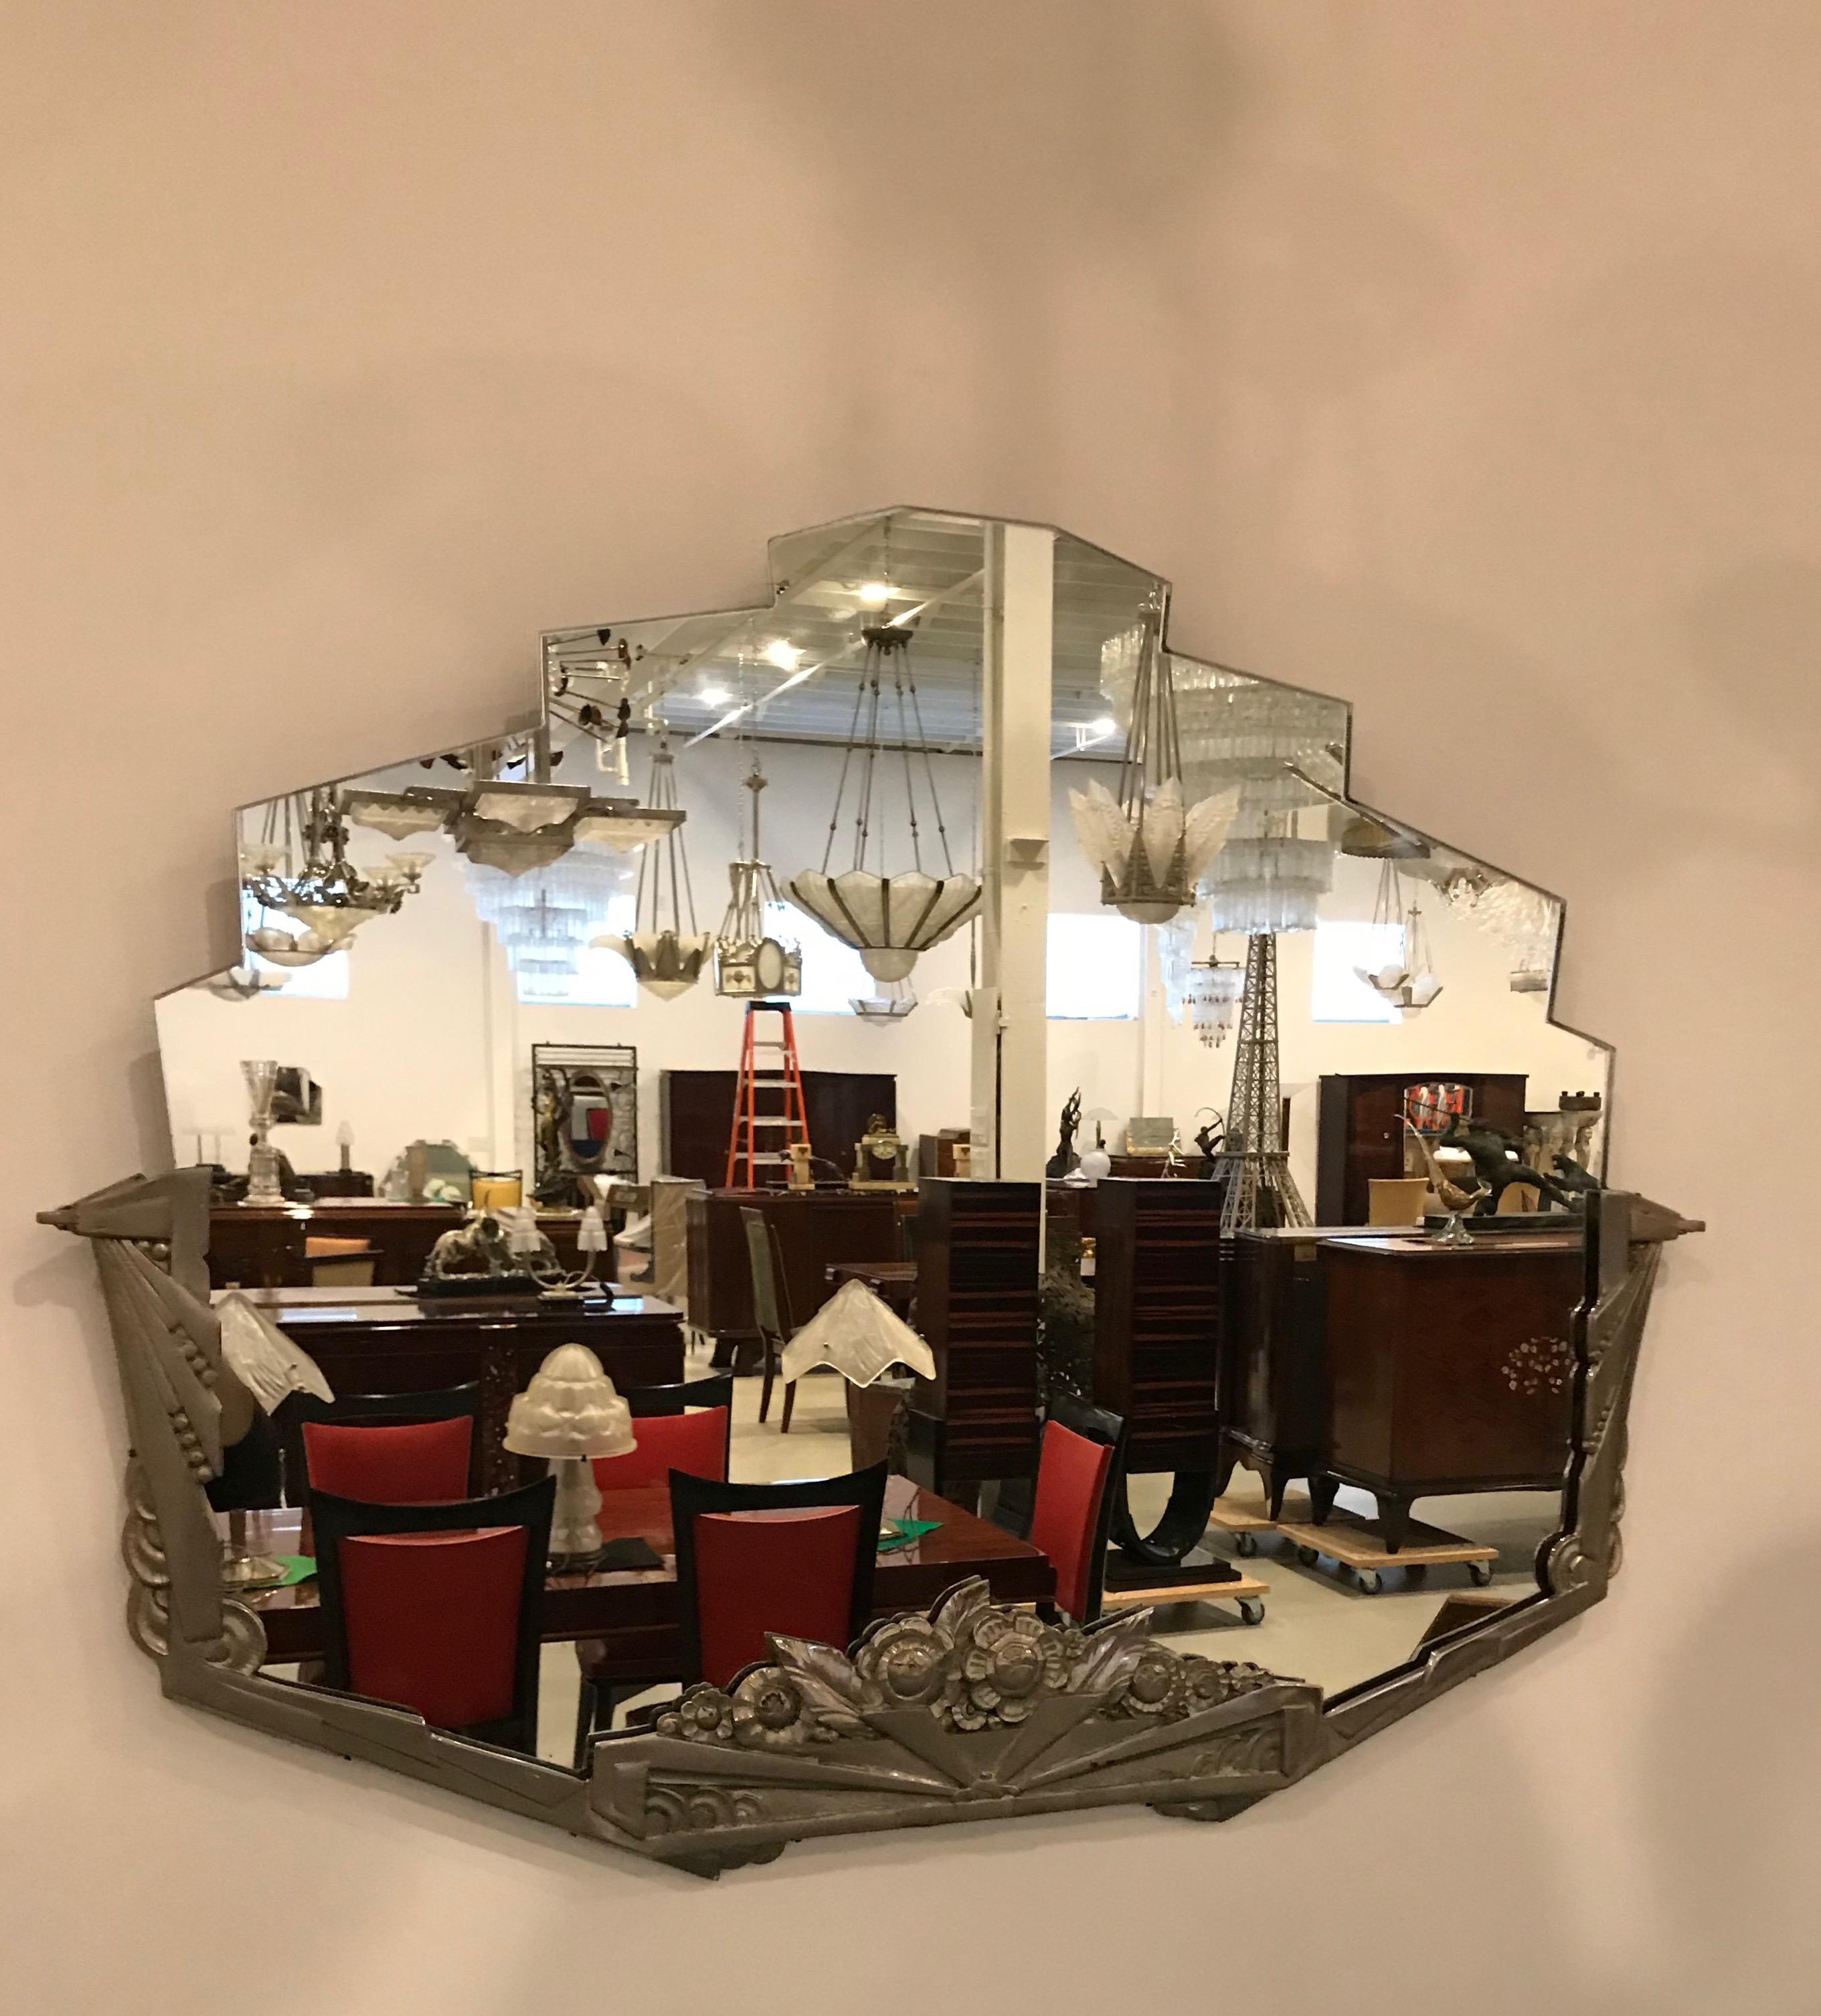 French Art Deco wall mirror with geometric and floral motif details. The frame has modest wear with signs of some patina. Re plating the frame upon request. The Mirror is in excellent condition.